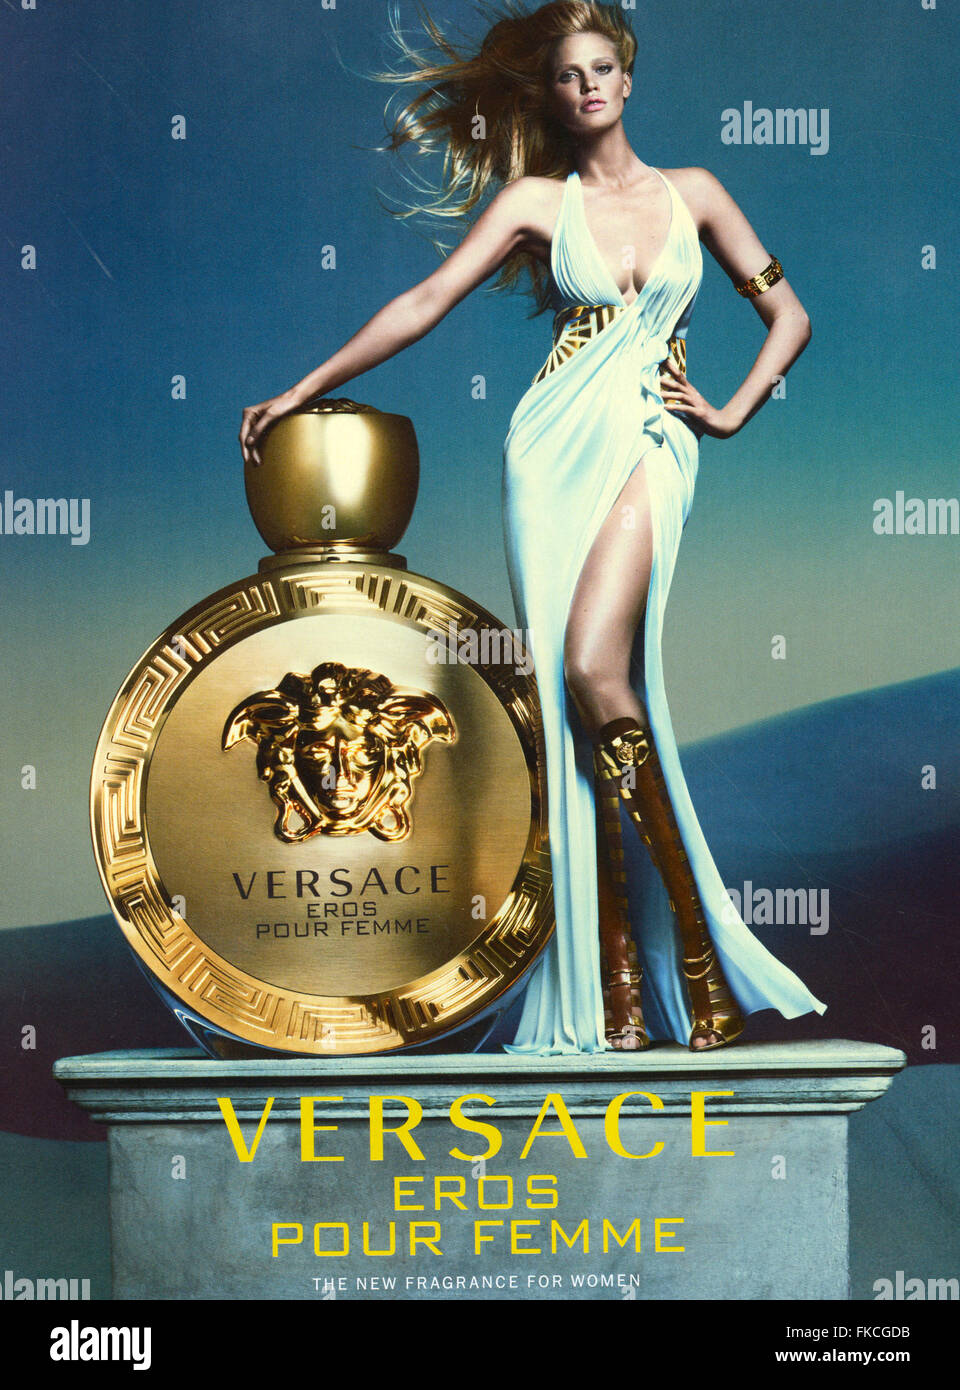 Versace Perfume High Resolution Stock Photography and Images - Alamy